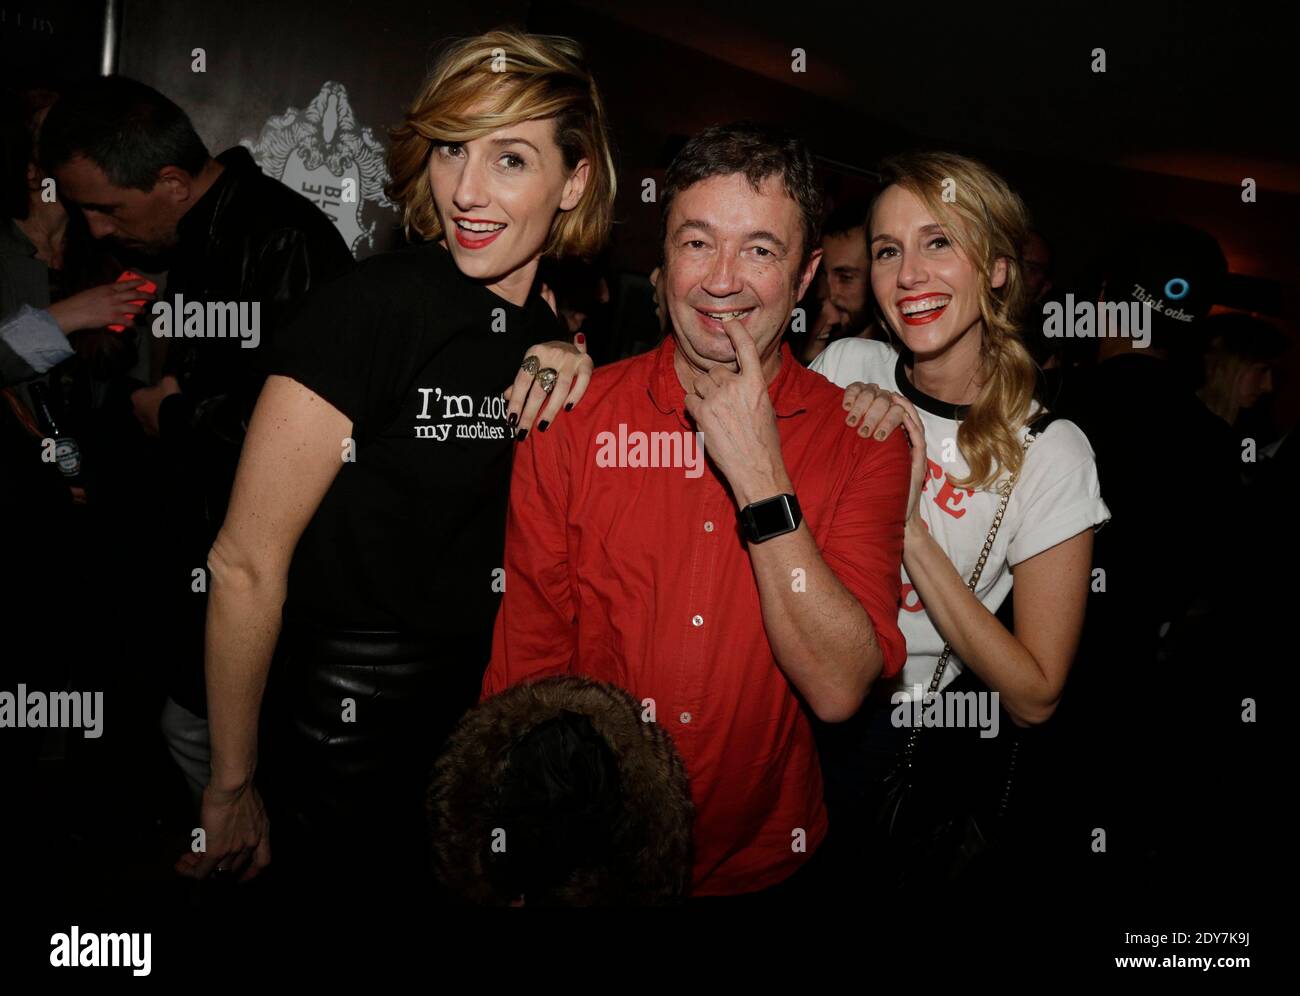 Exclusive - Frederic Bouraly, Marie-Aldine Girard and Anne-Sophie Girard attending Loft By Orphee 2 party organized by Anais Tihay, Tarik Seddak and Jesse Remond Lacroix held at Orphee, in Paris, France on December 10, 2014. Photo by Jerome Domine ABACAPRESS.COM Stock Photo